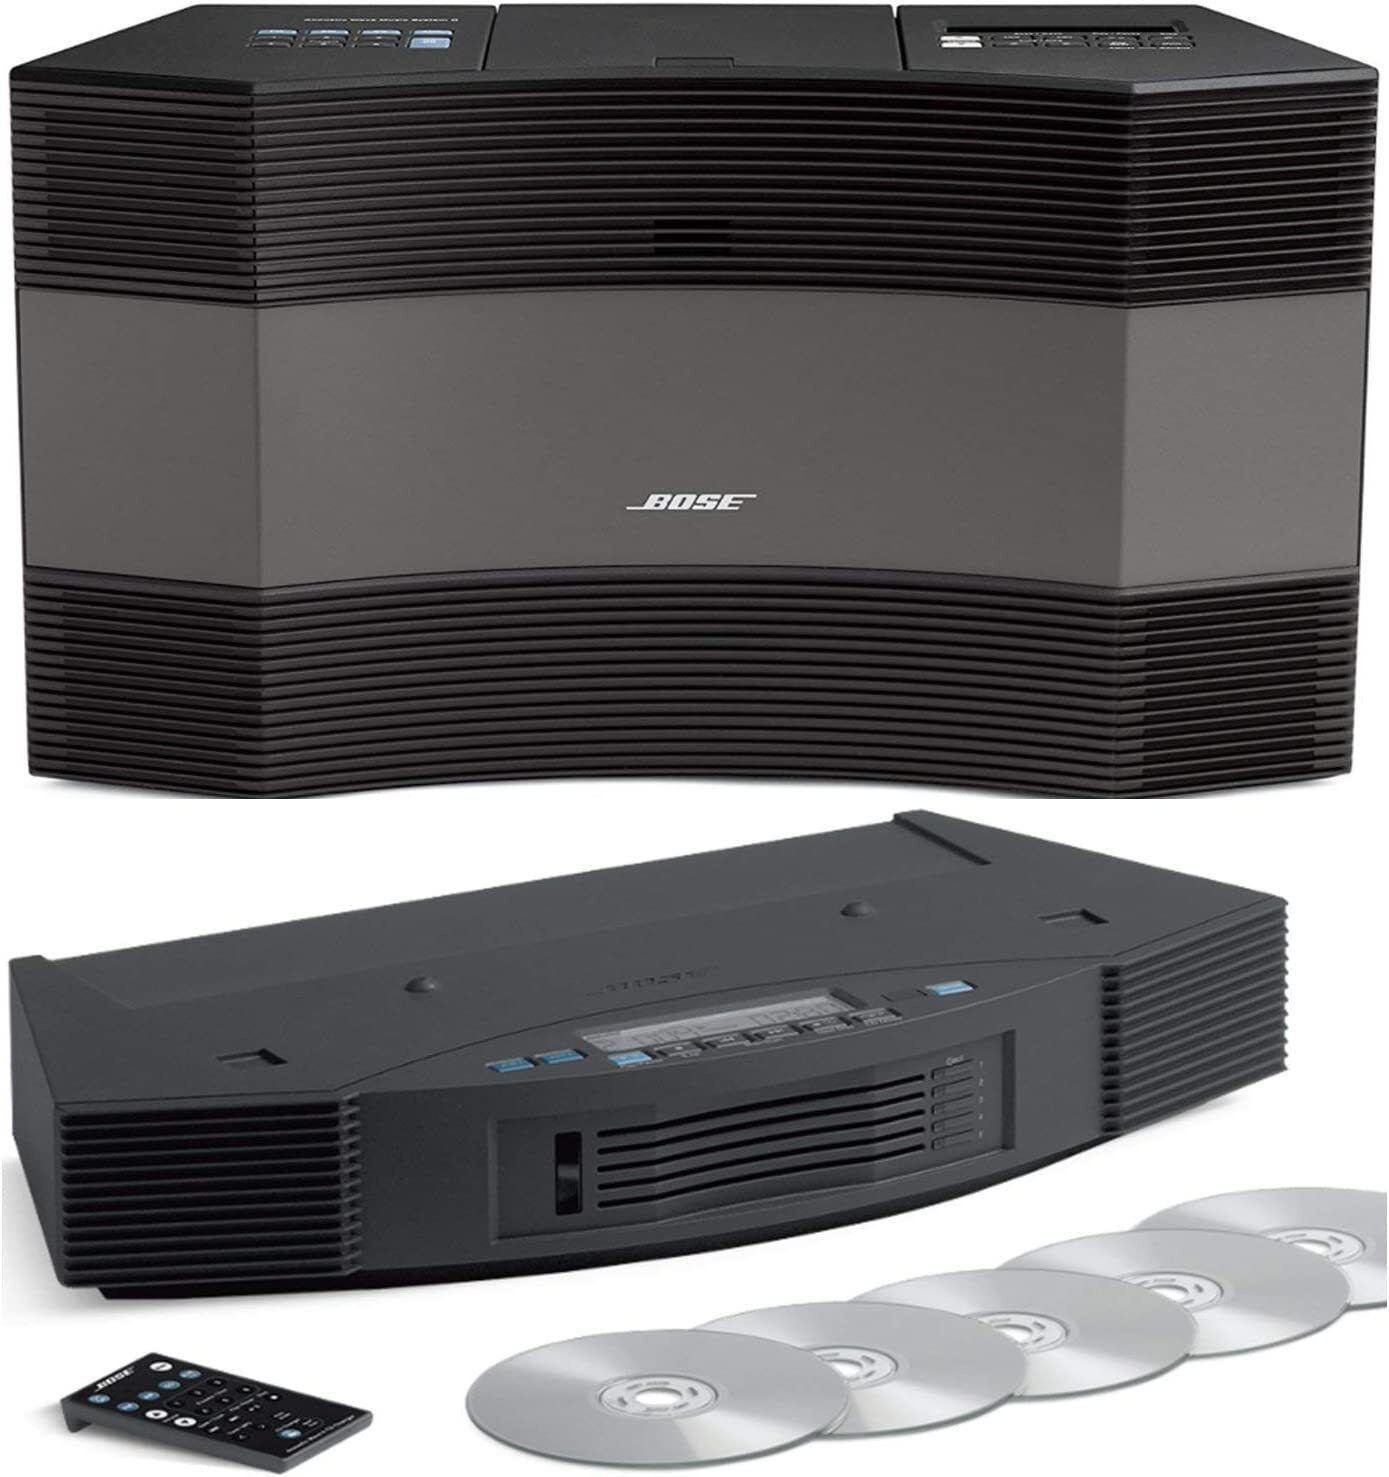 Bose Acoustic Wave Music System and 5-CD Multi Disc Changer II